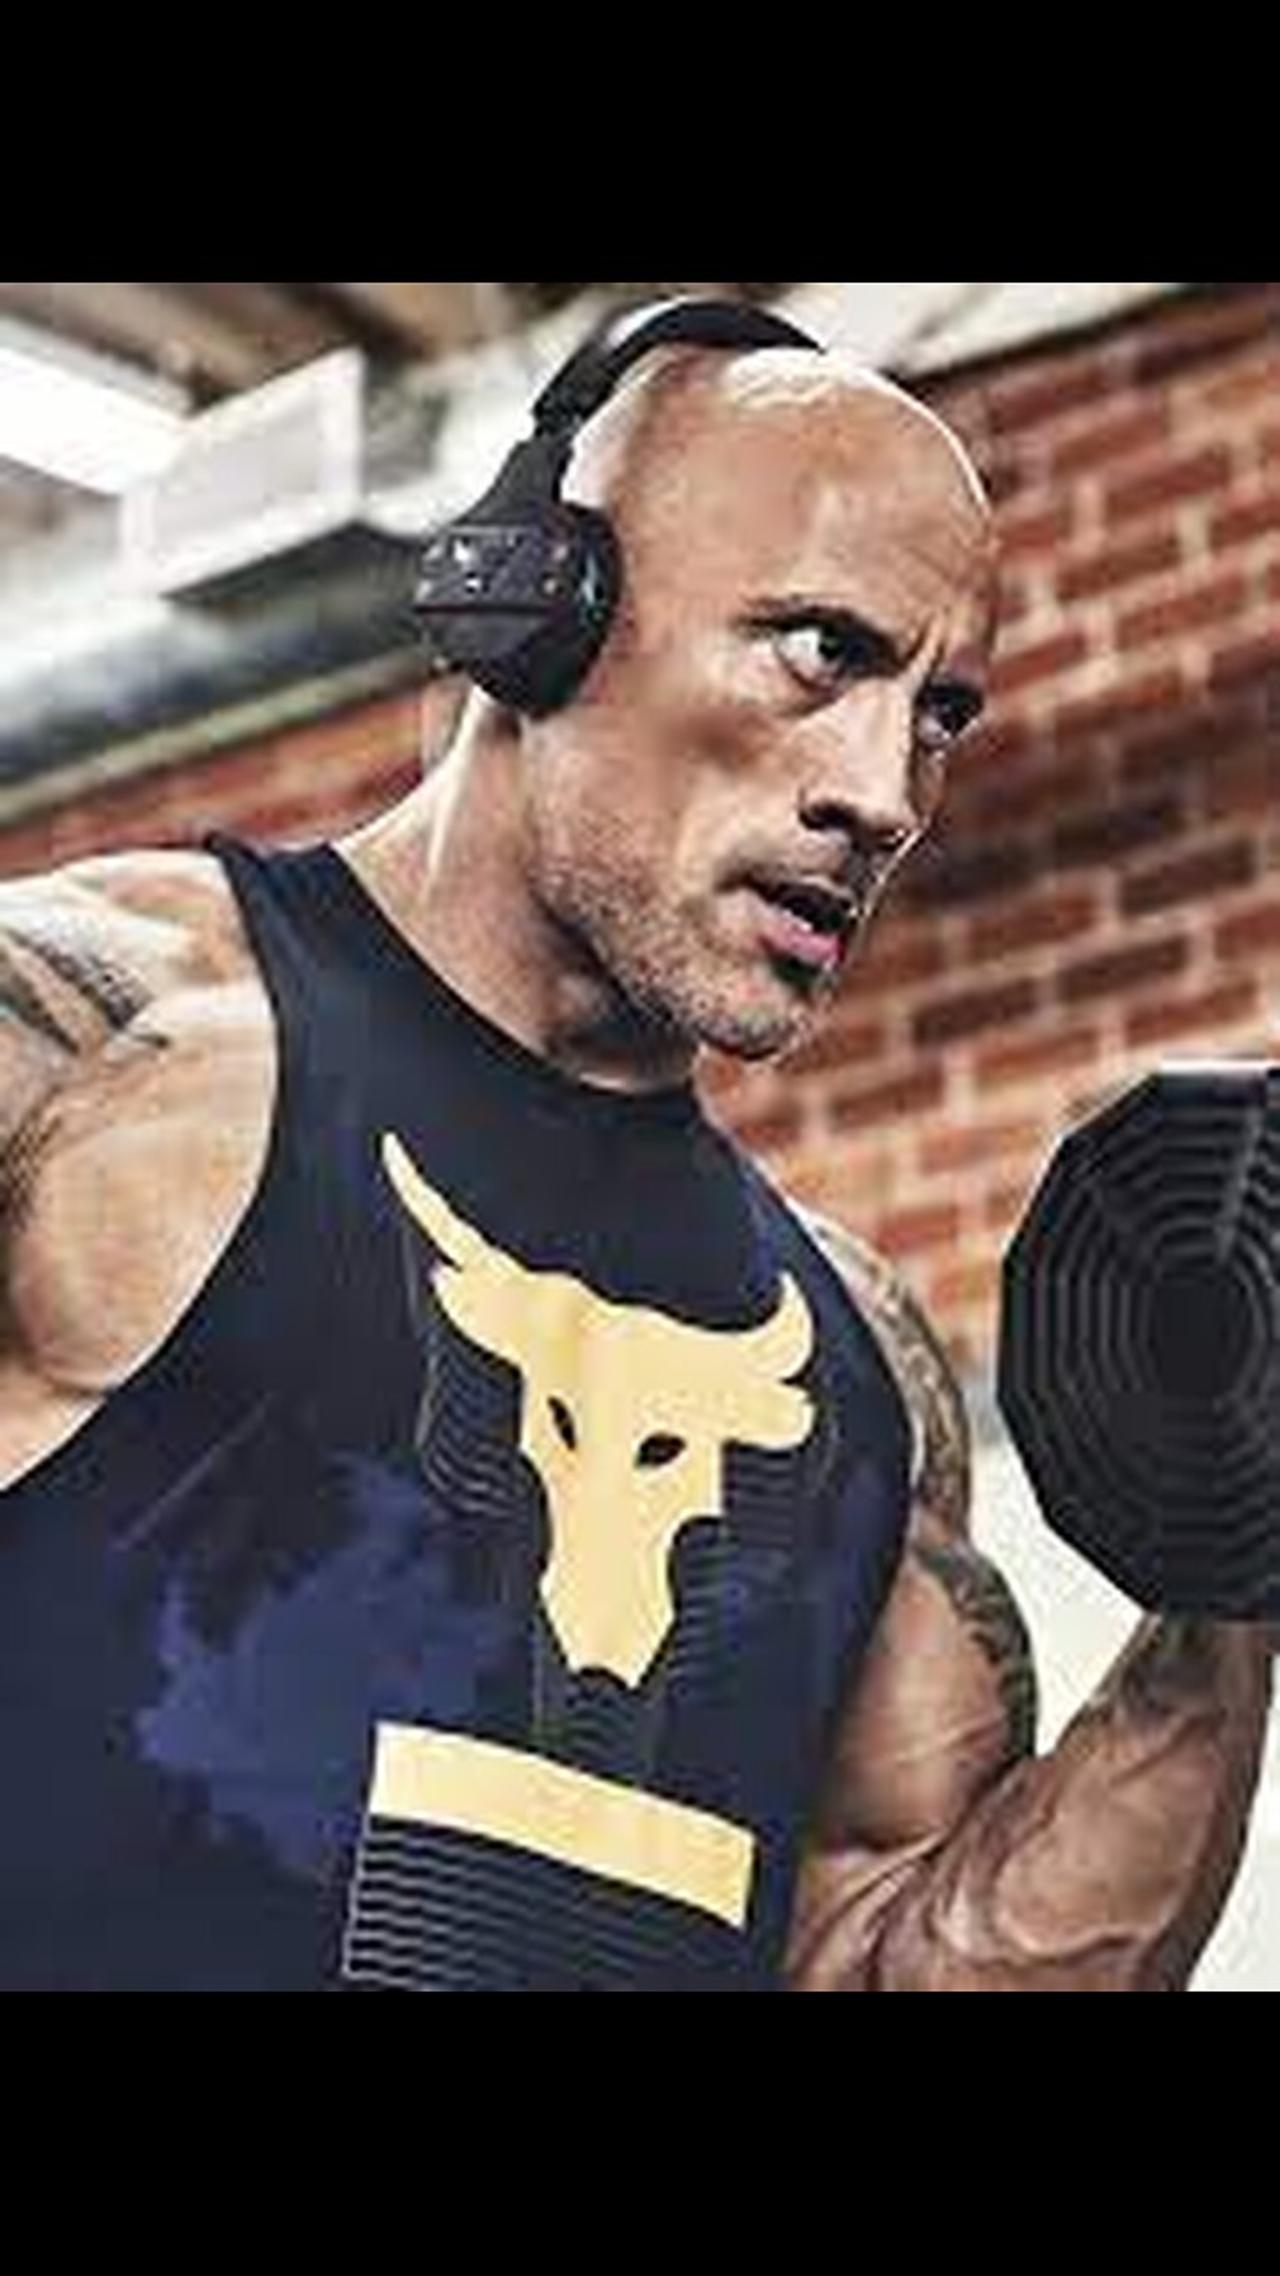 How old is the rock?